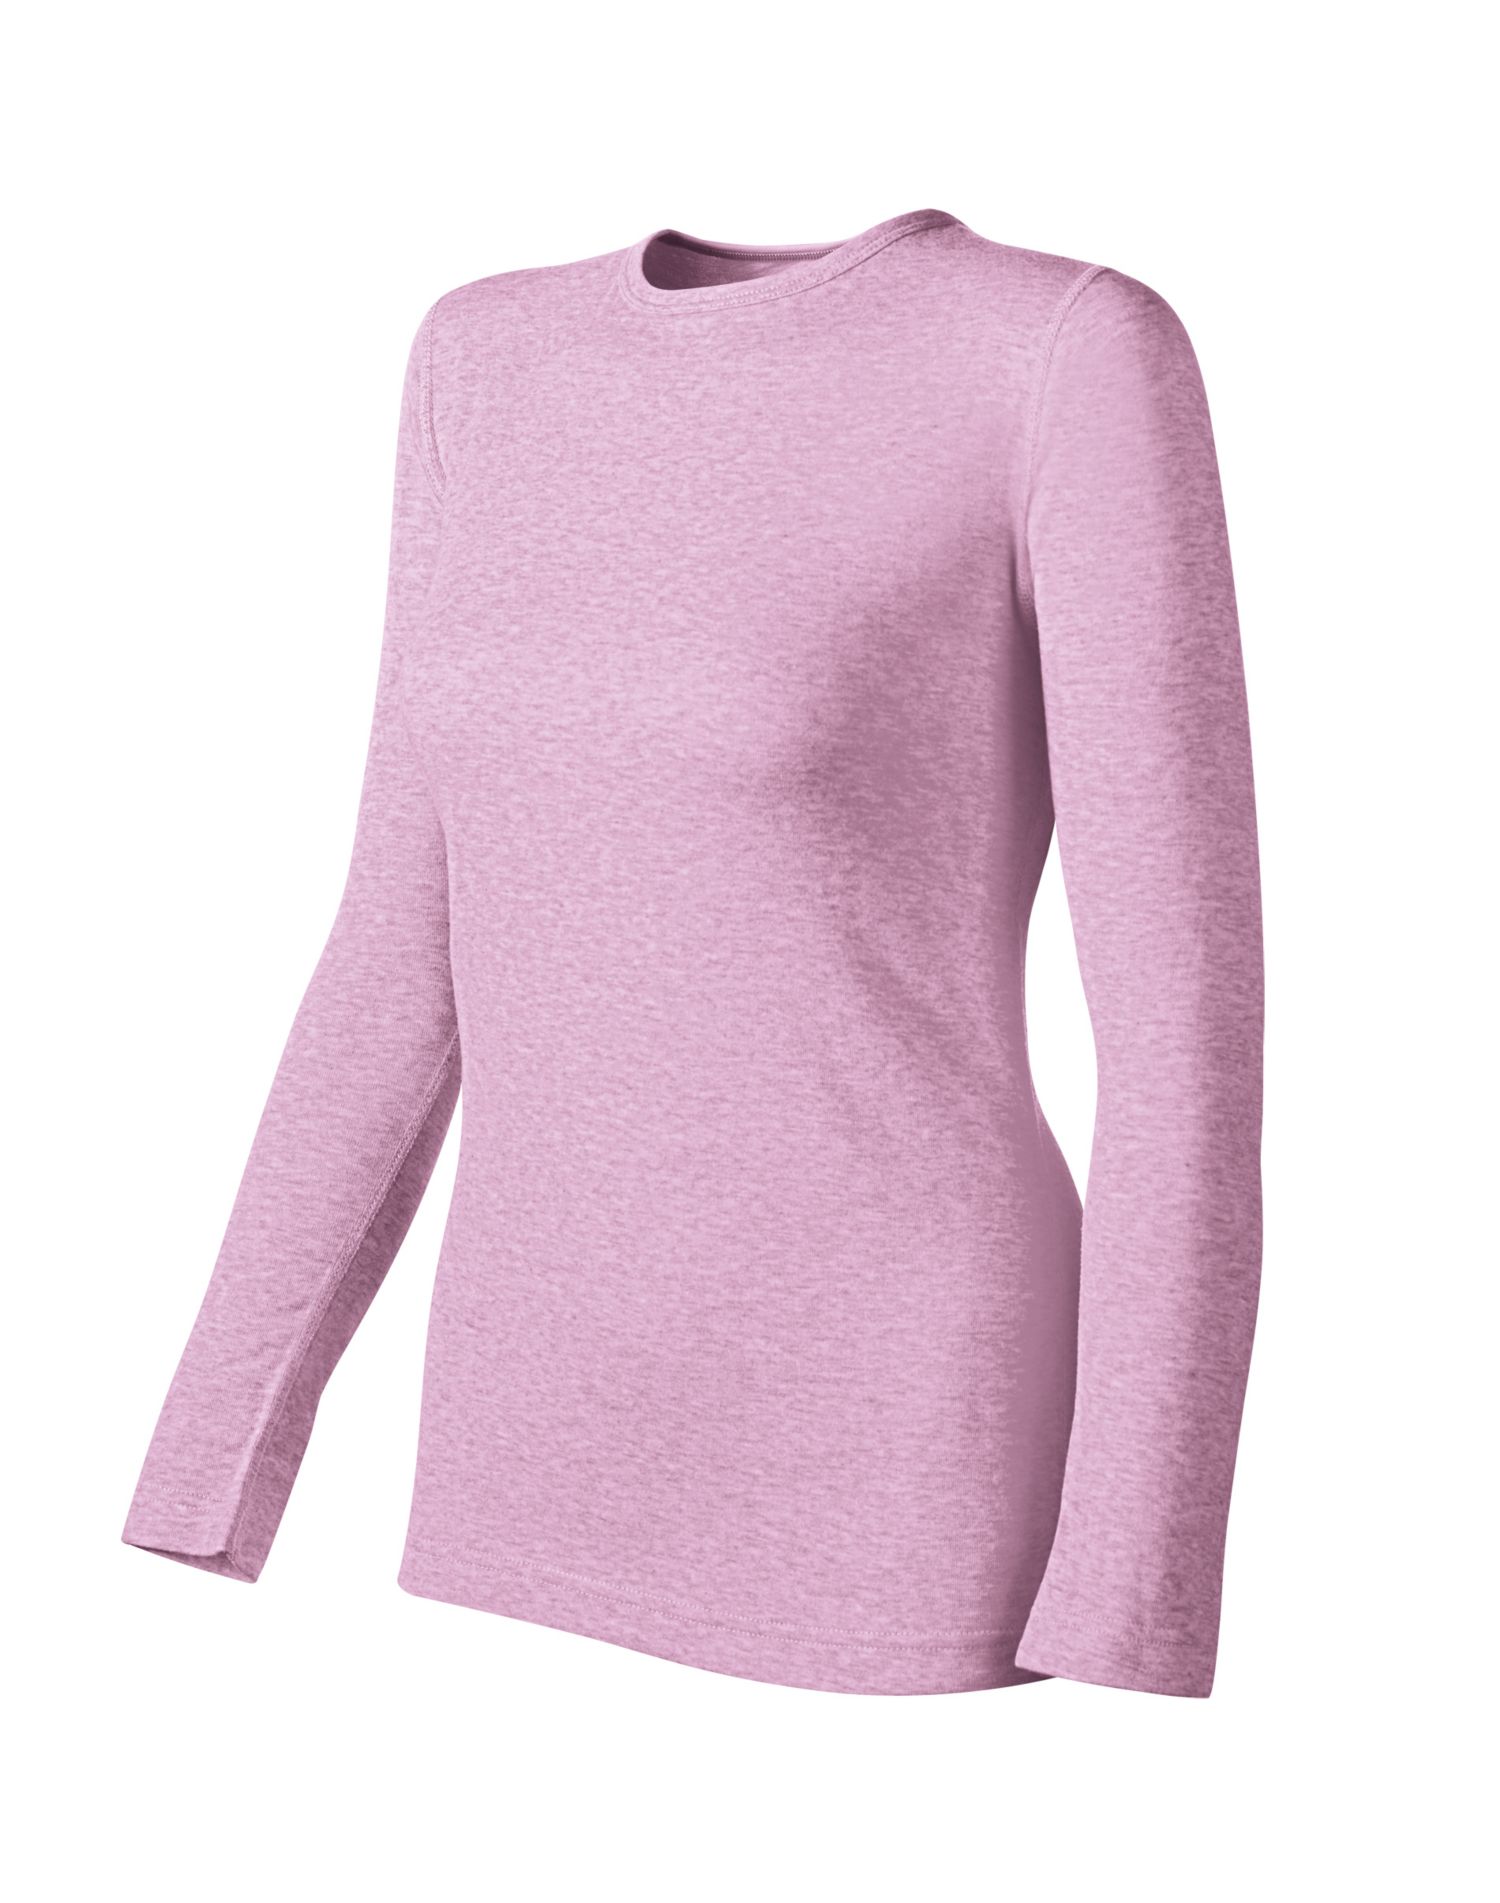 Duofold by Champion Womens Originals Mid-Weight Thermal Shirt - Apparel  Direct Distributor